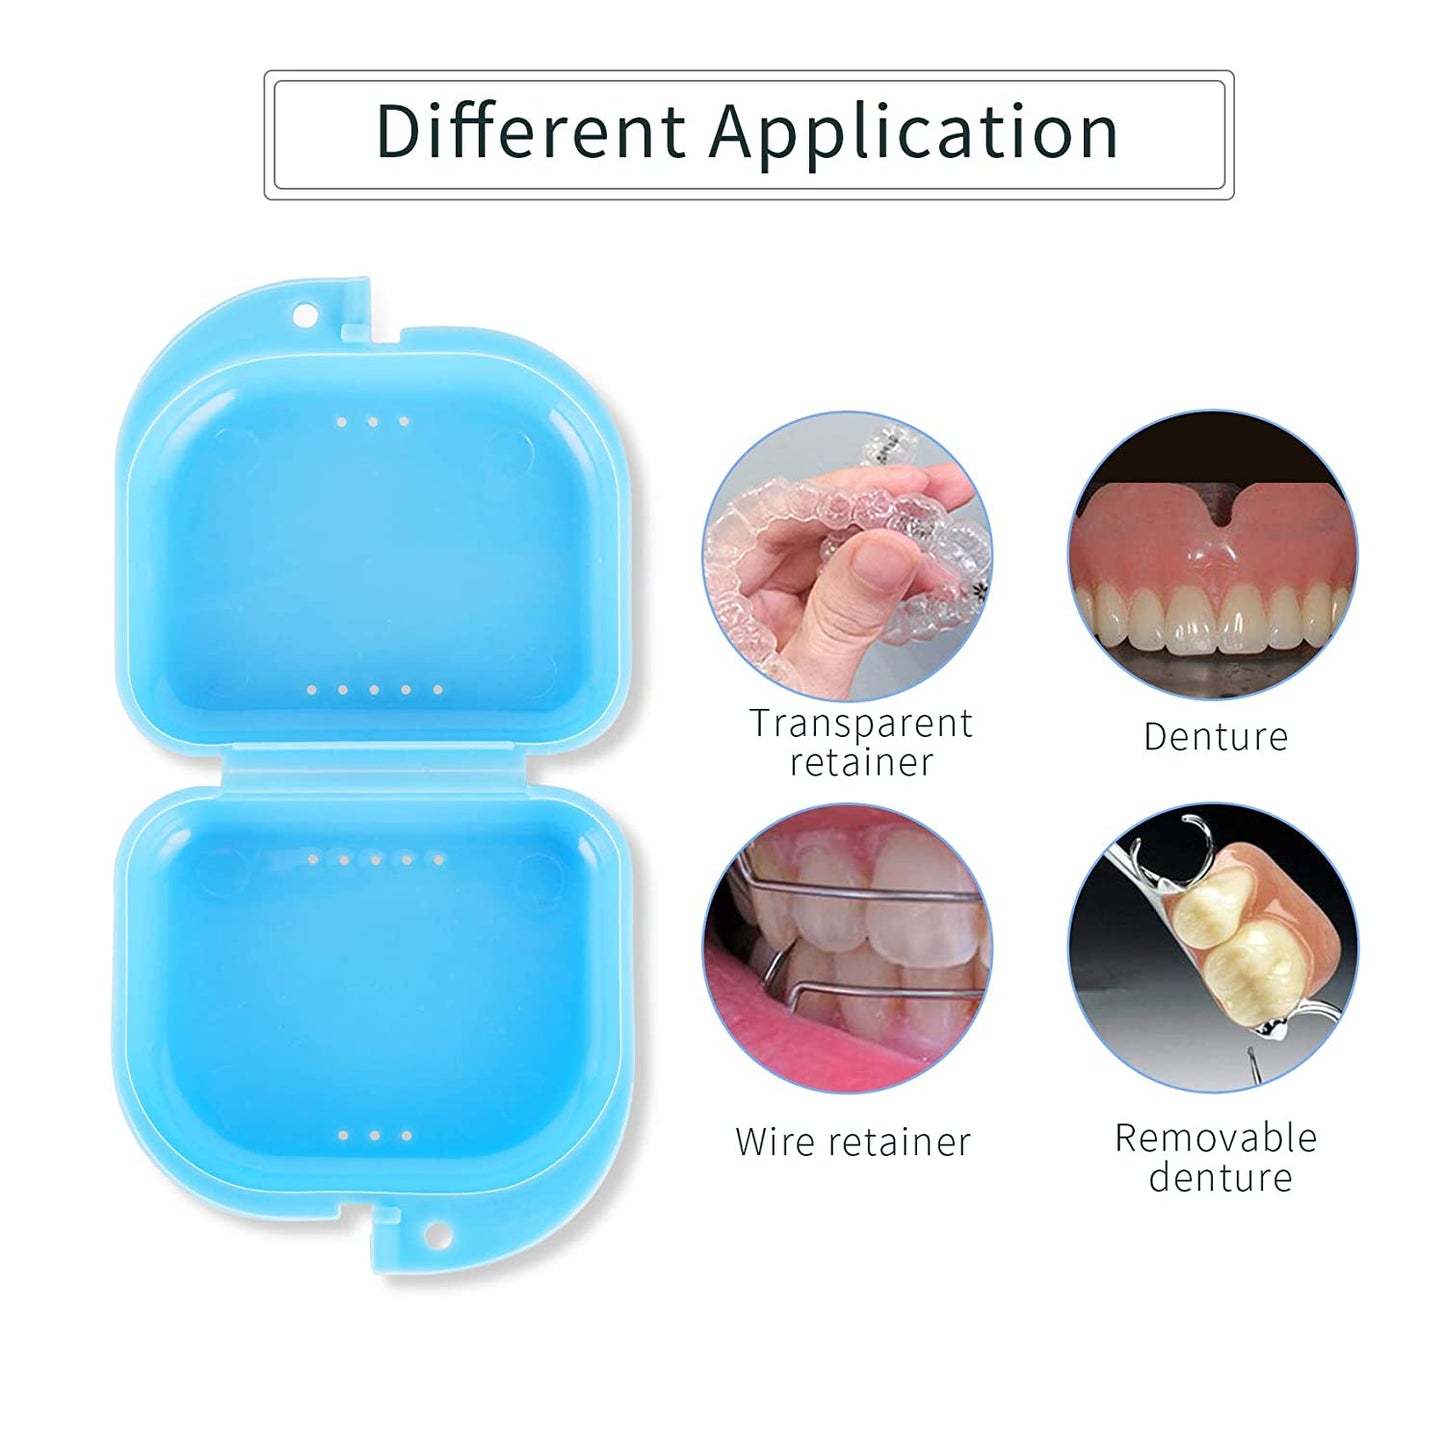 Dental Mouthguard Container Orthodontic Retainer Case with Vent Holes, Denture Holder Box Clear Aligner Case Slim for Household|Travel|Office - Bluish - Light & Easy to Carry 6 pcs in package